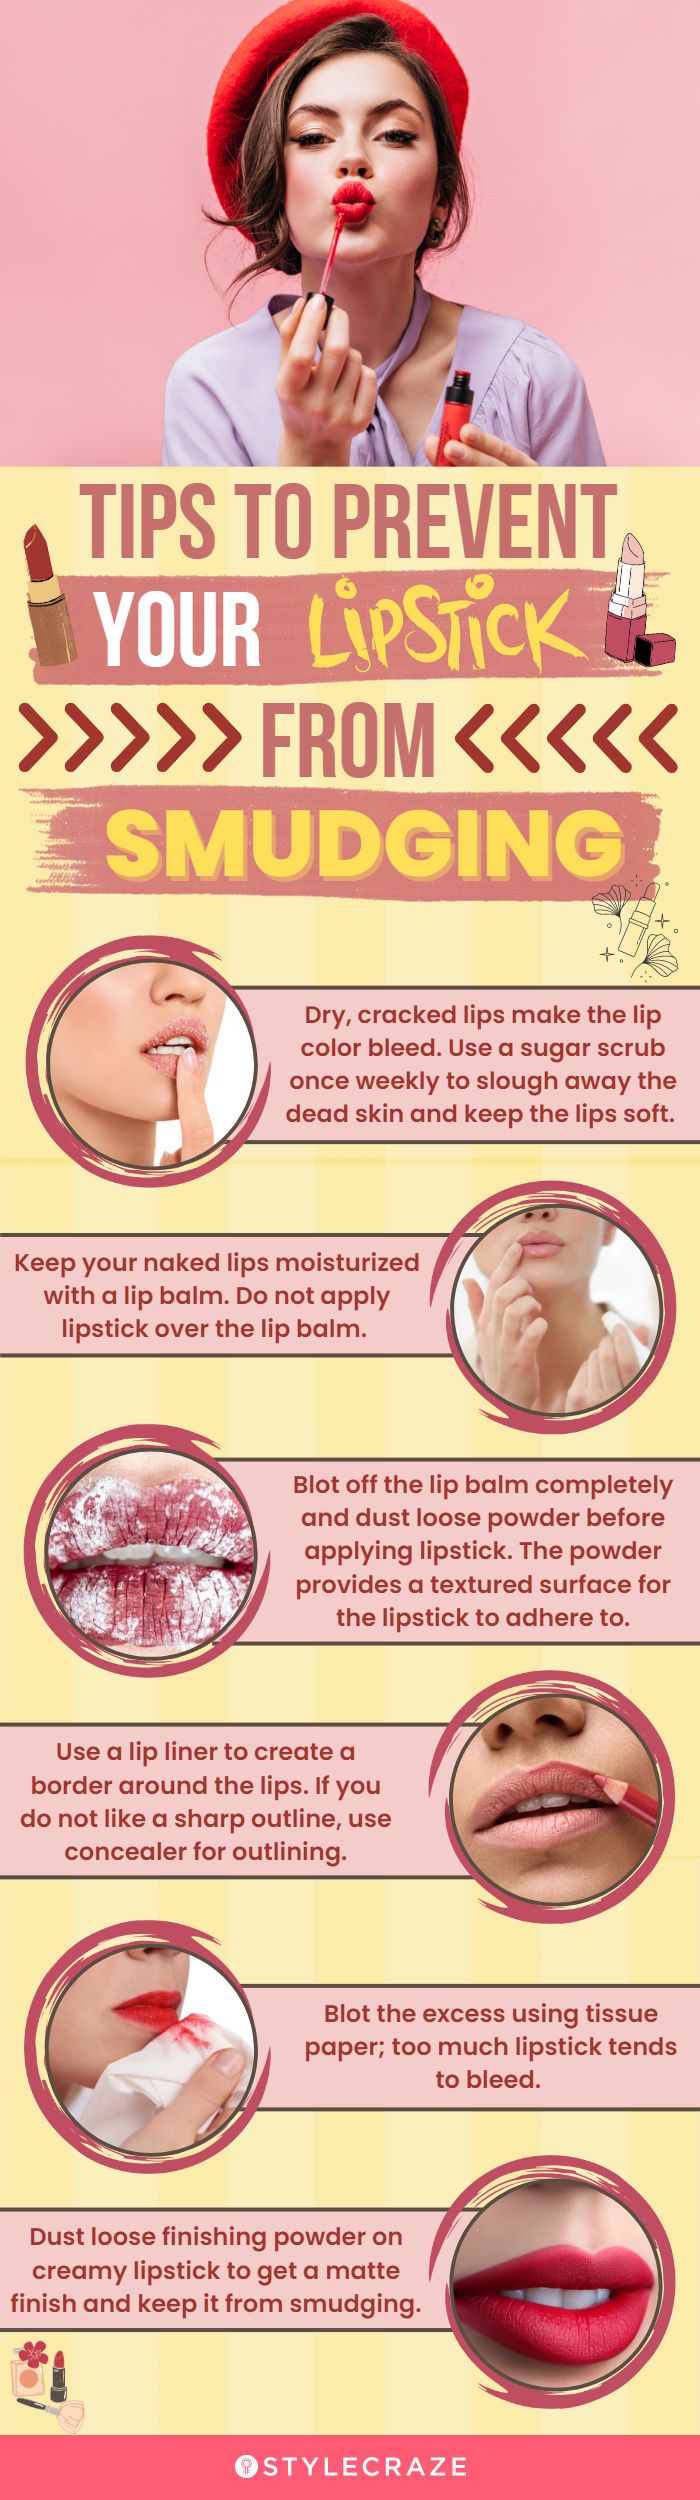 Tips To Prevent Your Lipstick From Smudging (infographic)